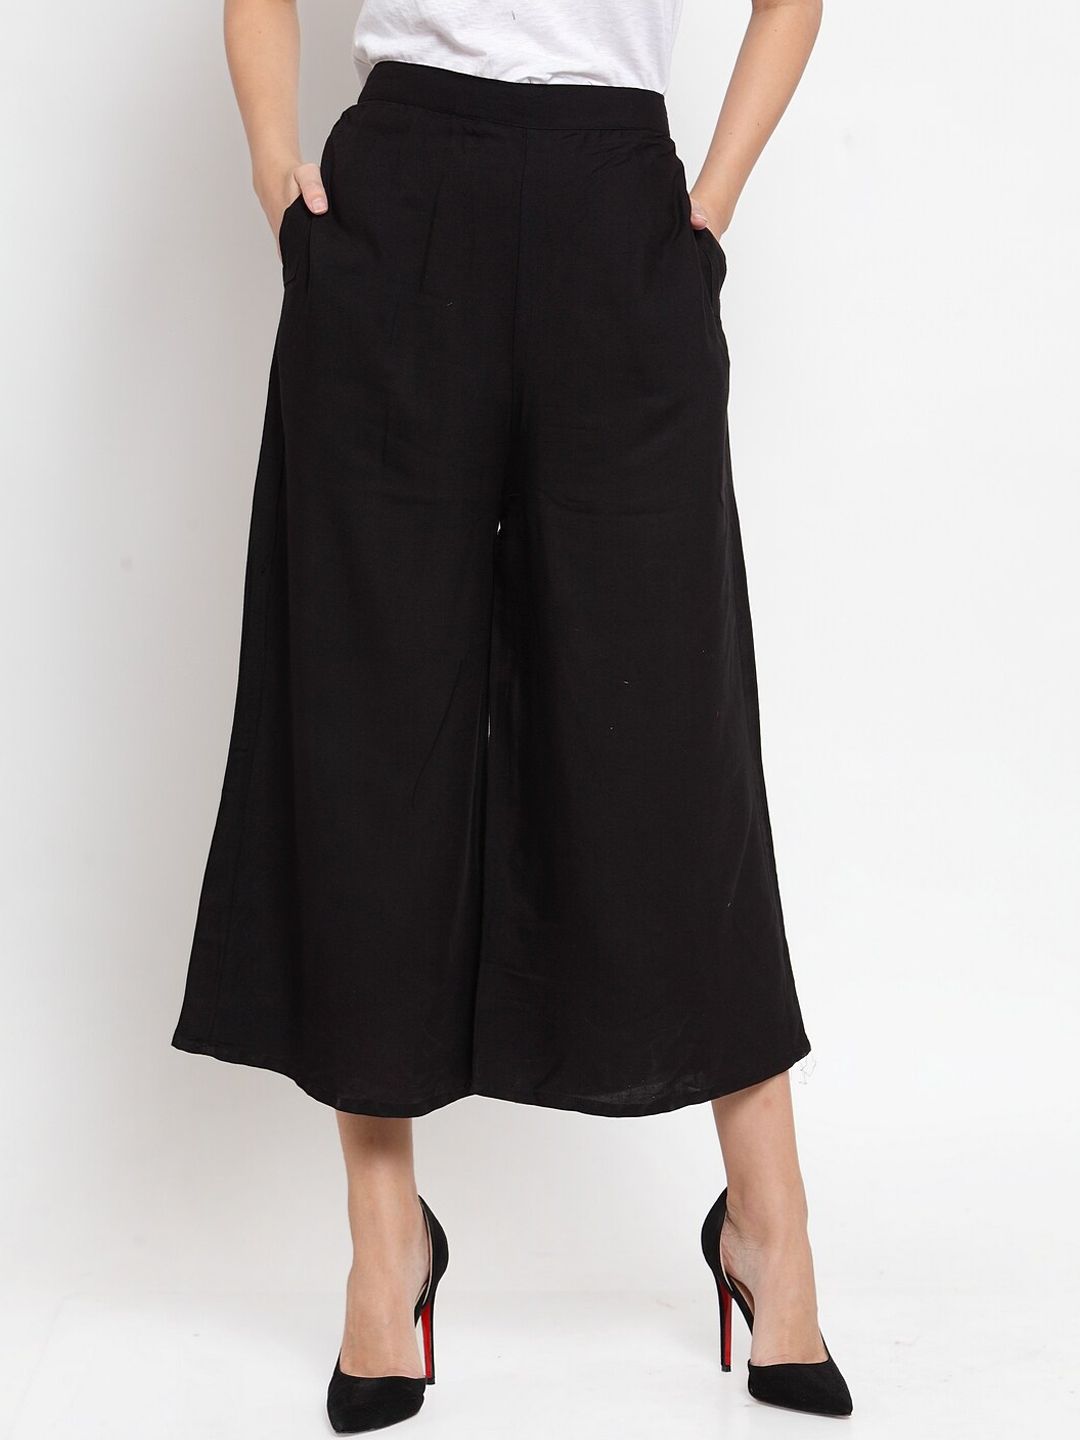 Clora Creation Women Black Smart Culottes Trousers Price in India